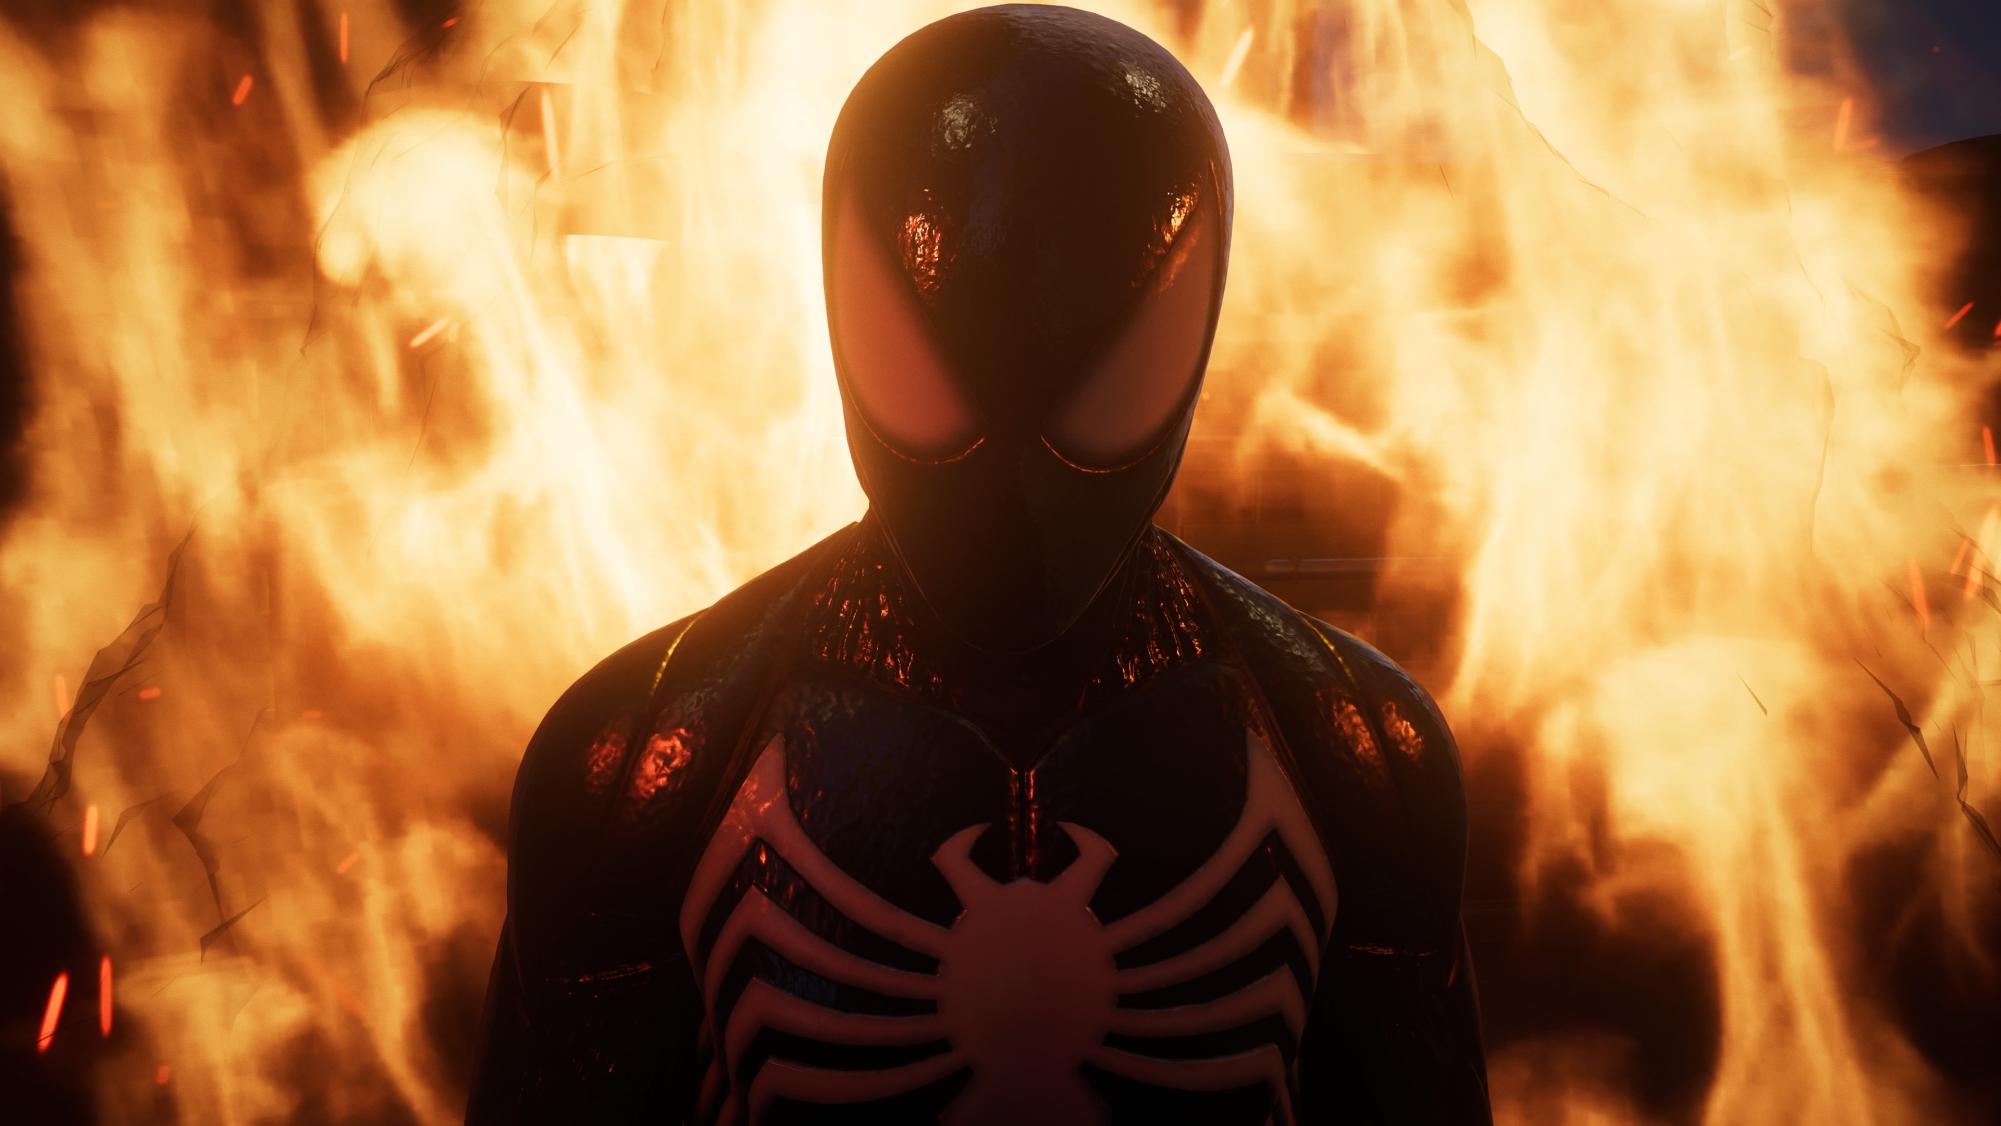 Marvel's Spider-Man 2: some players are already slamming the game's 'bad'  graphics